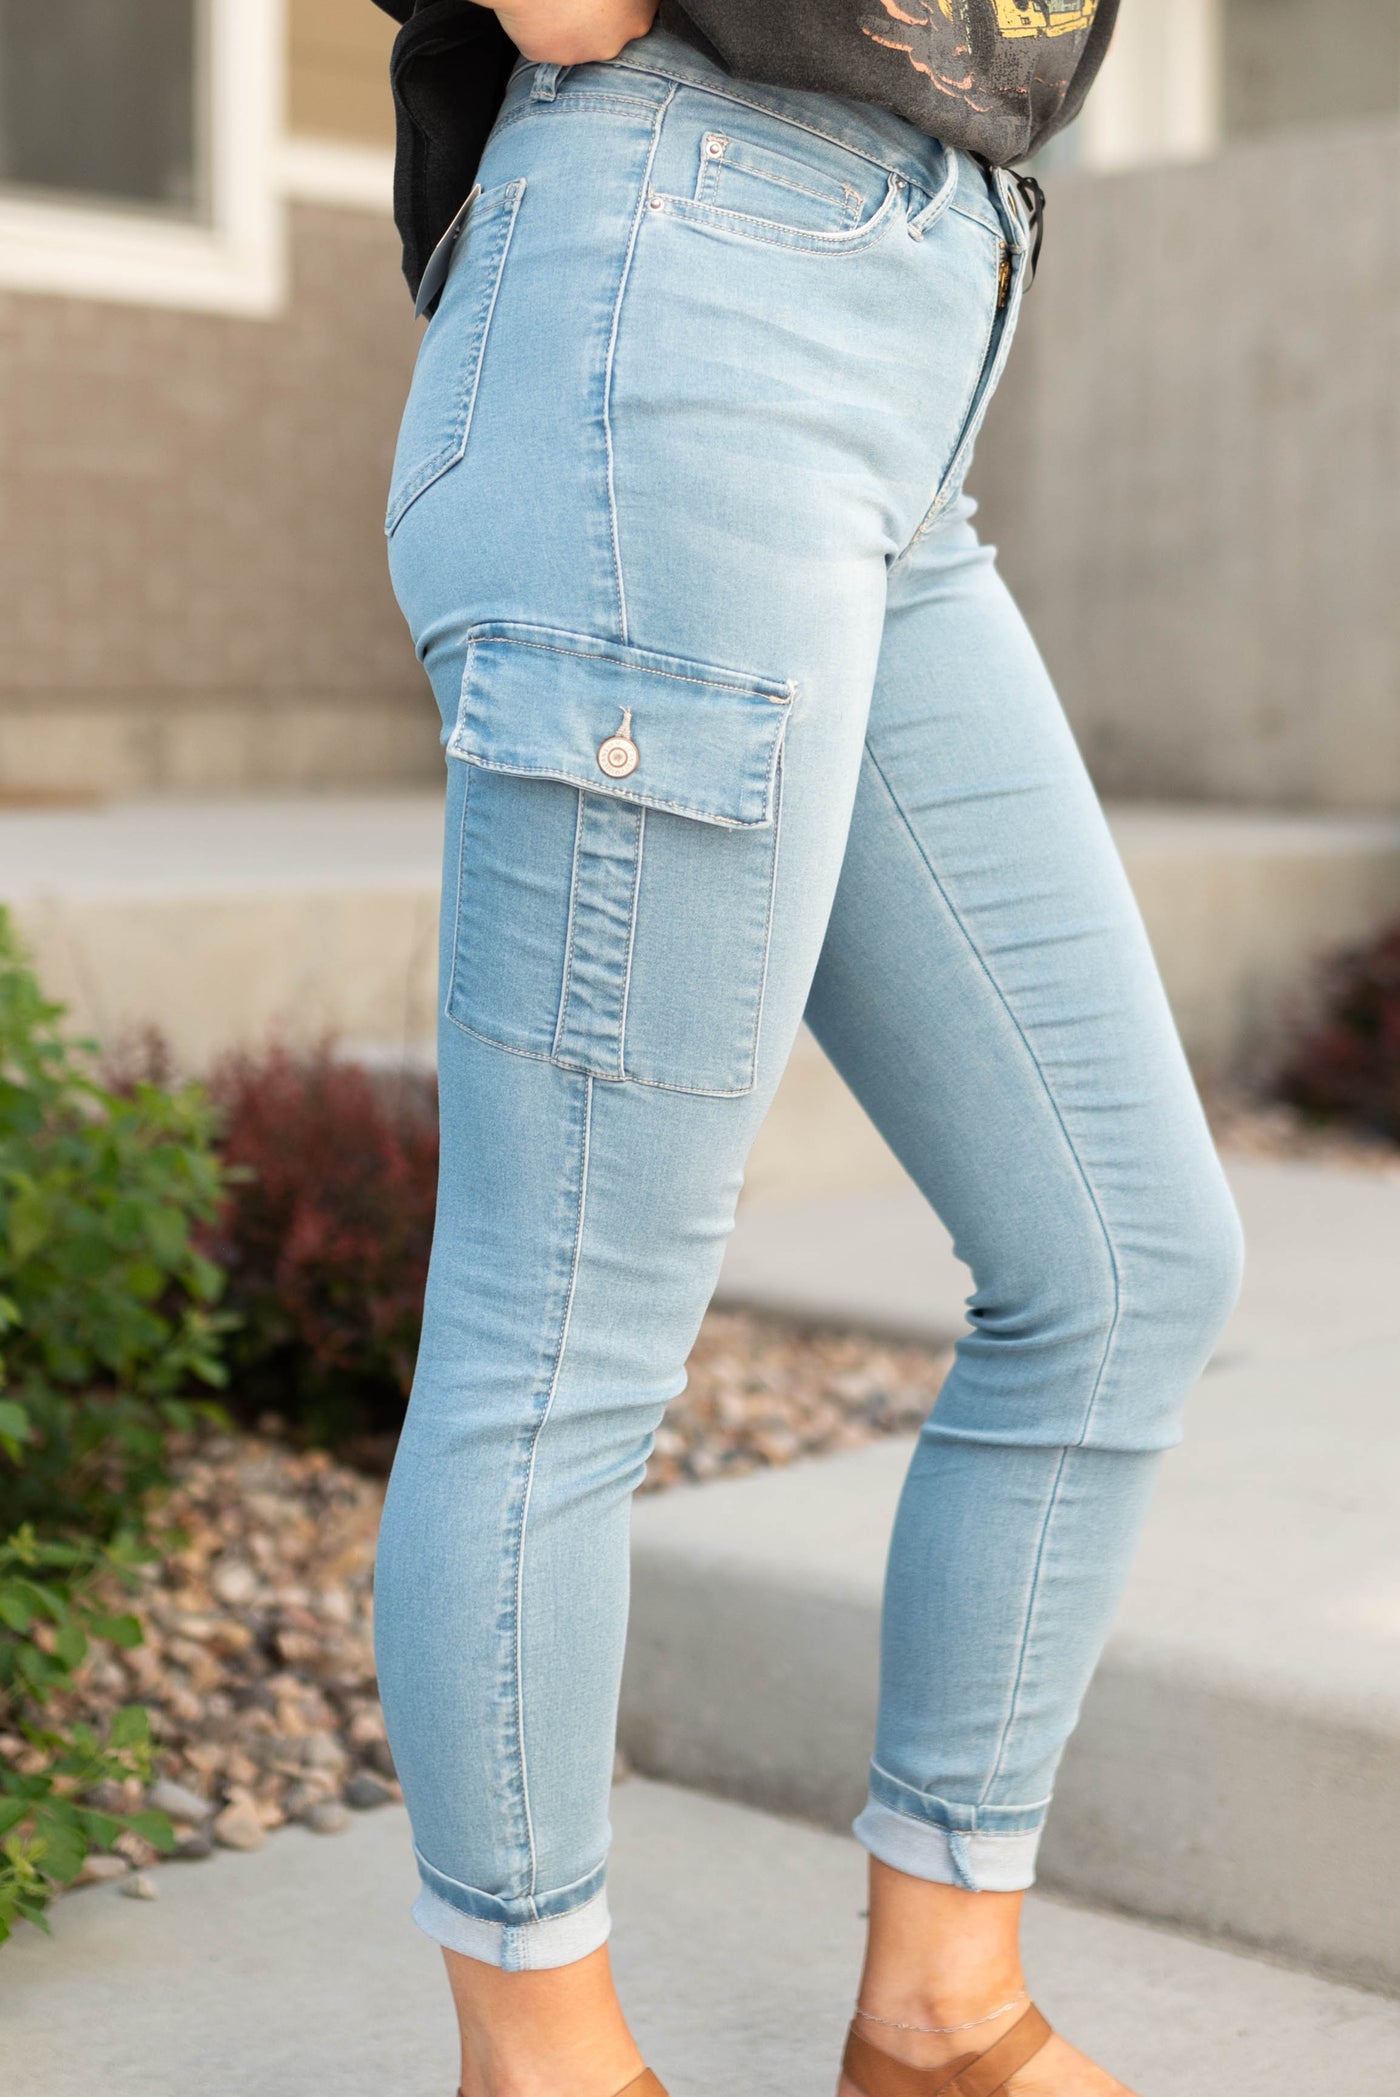 Side view of light skinny jeans